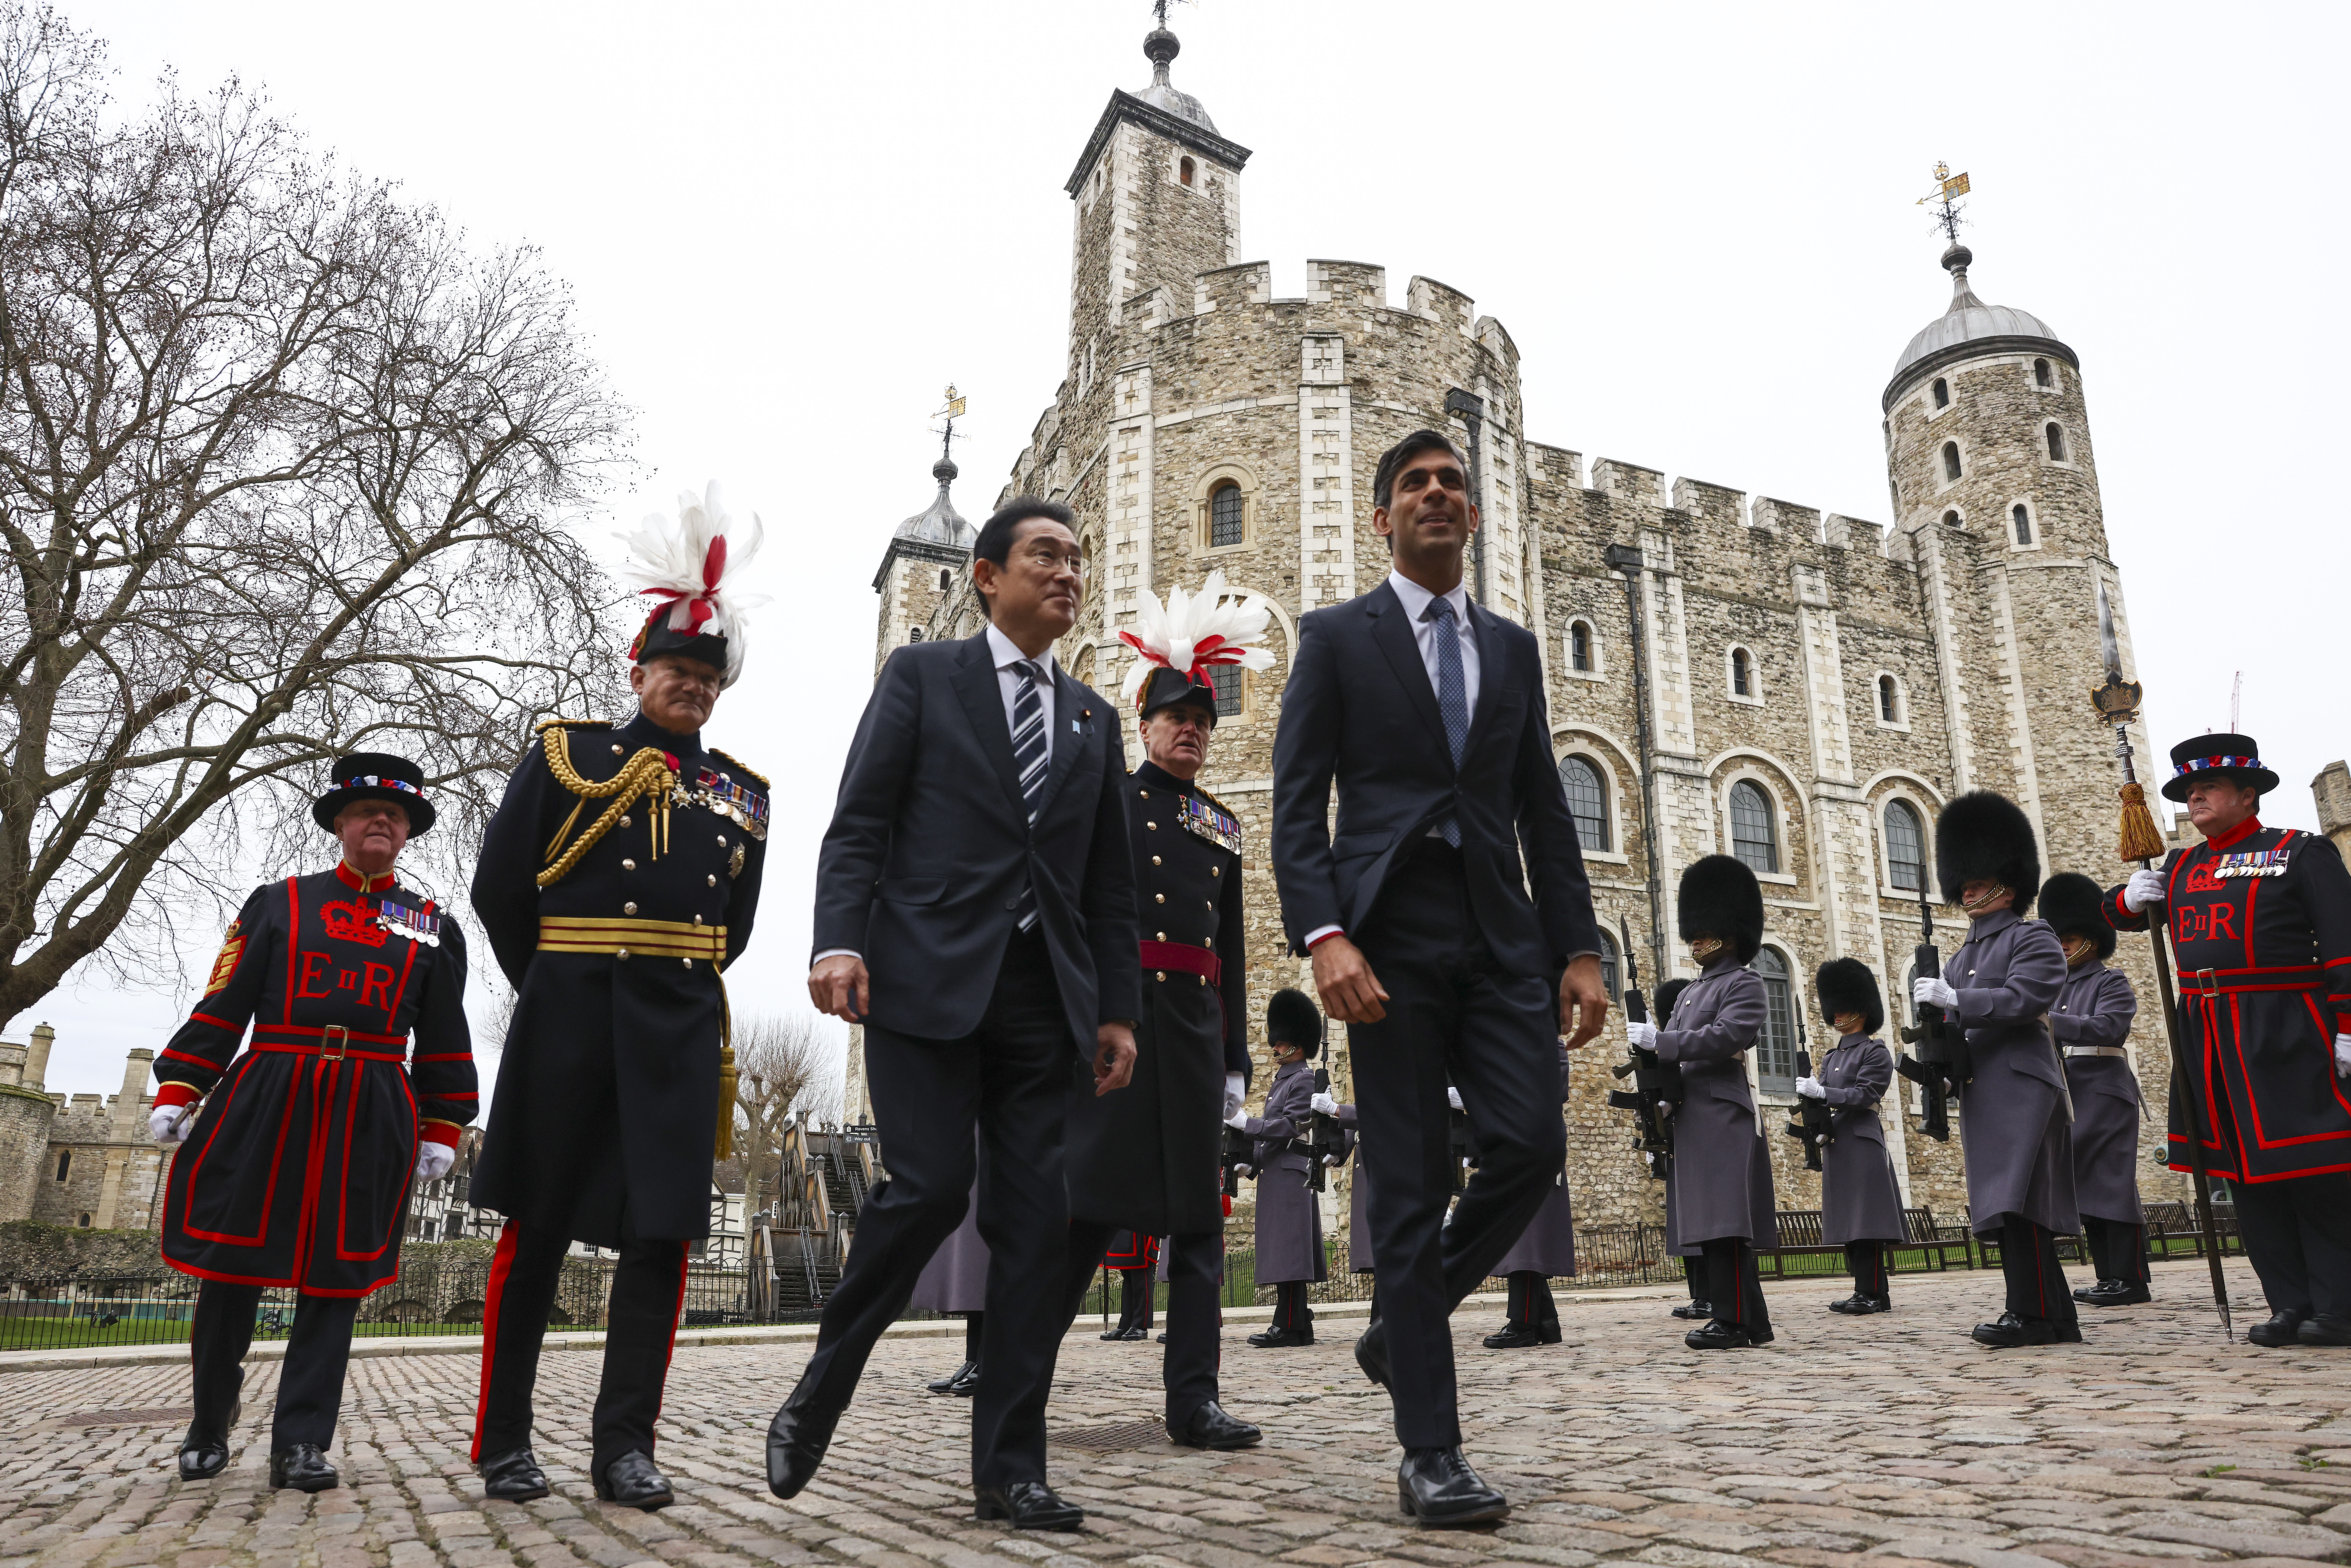 Prime Minister Rishi Sunak and Prime Minister Fumio Kishida walk past the Irish Guards' Guard of Honour. In attendance are also Tower of London Beefeaters and senior military personnel. The Tower of London is in the background.